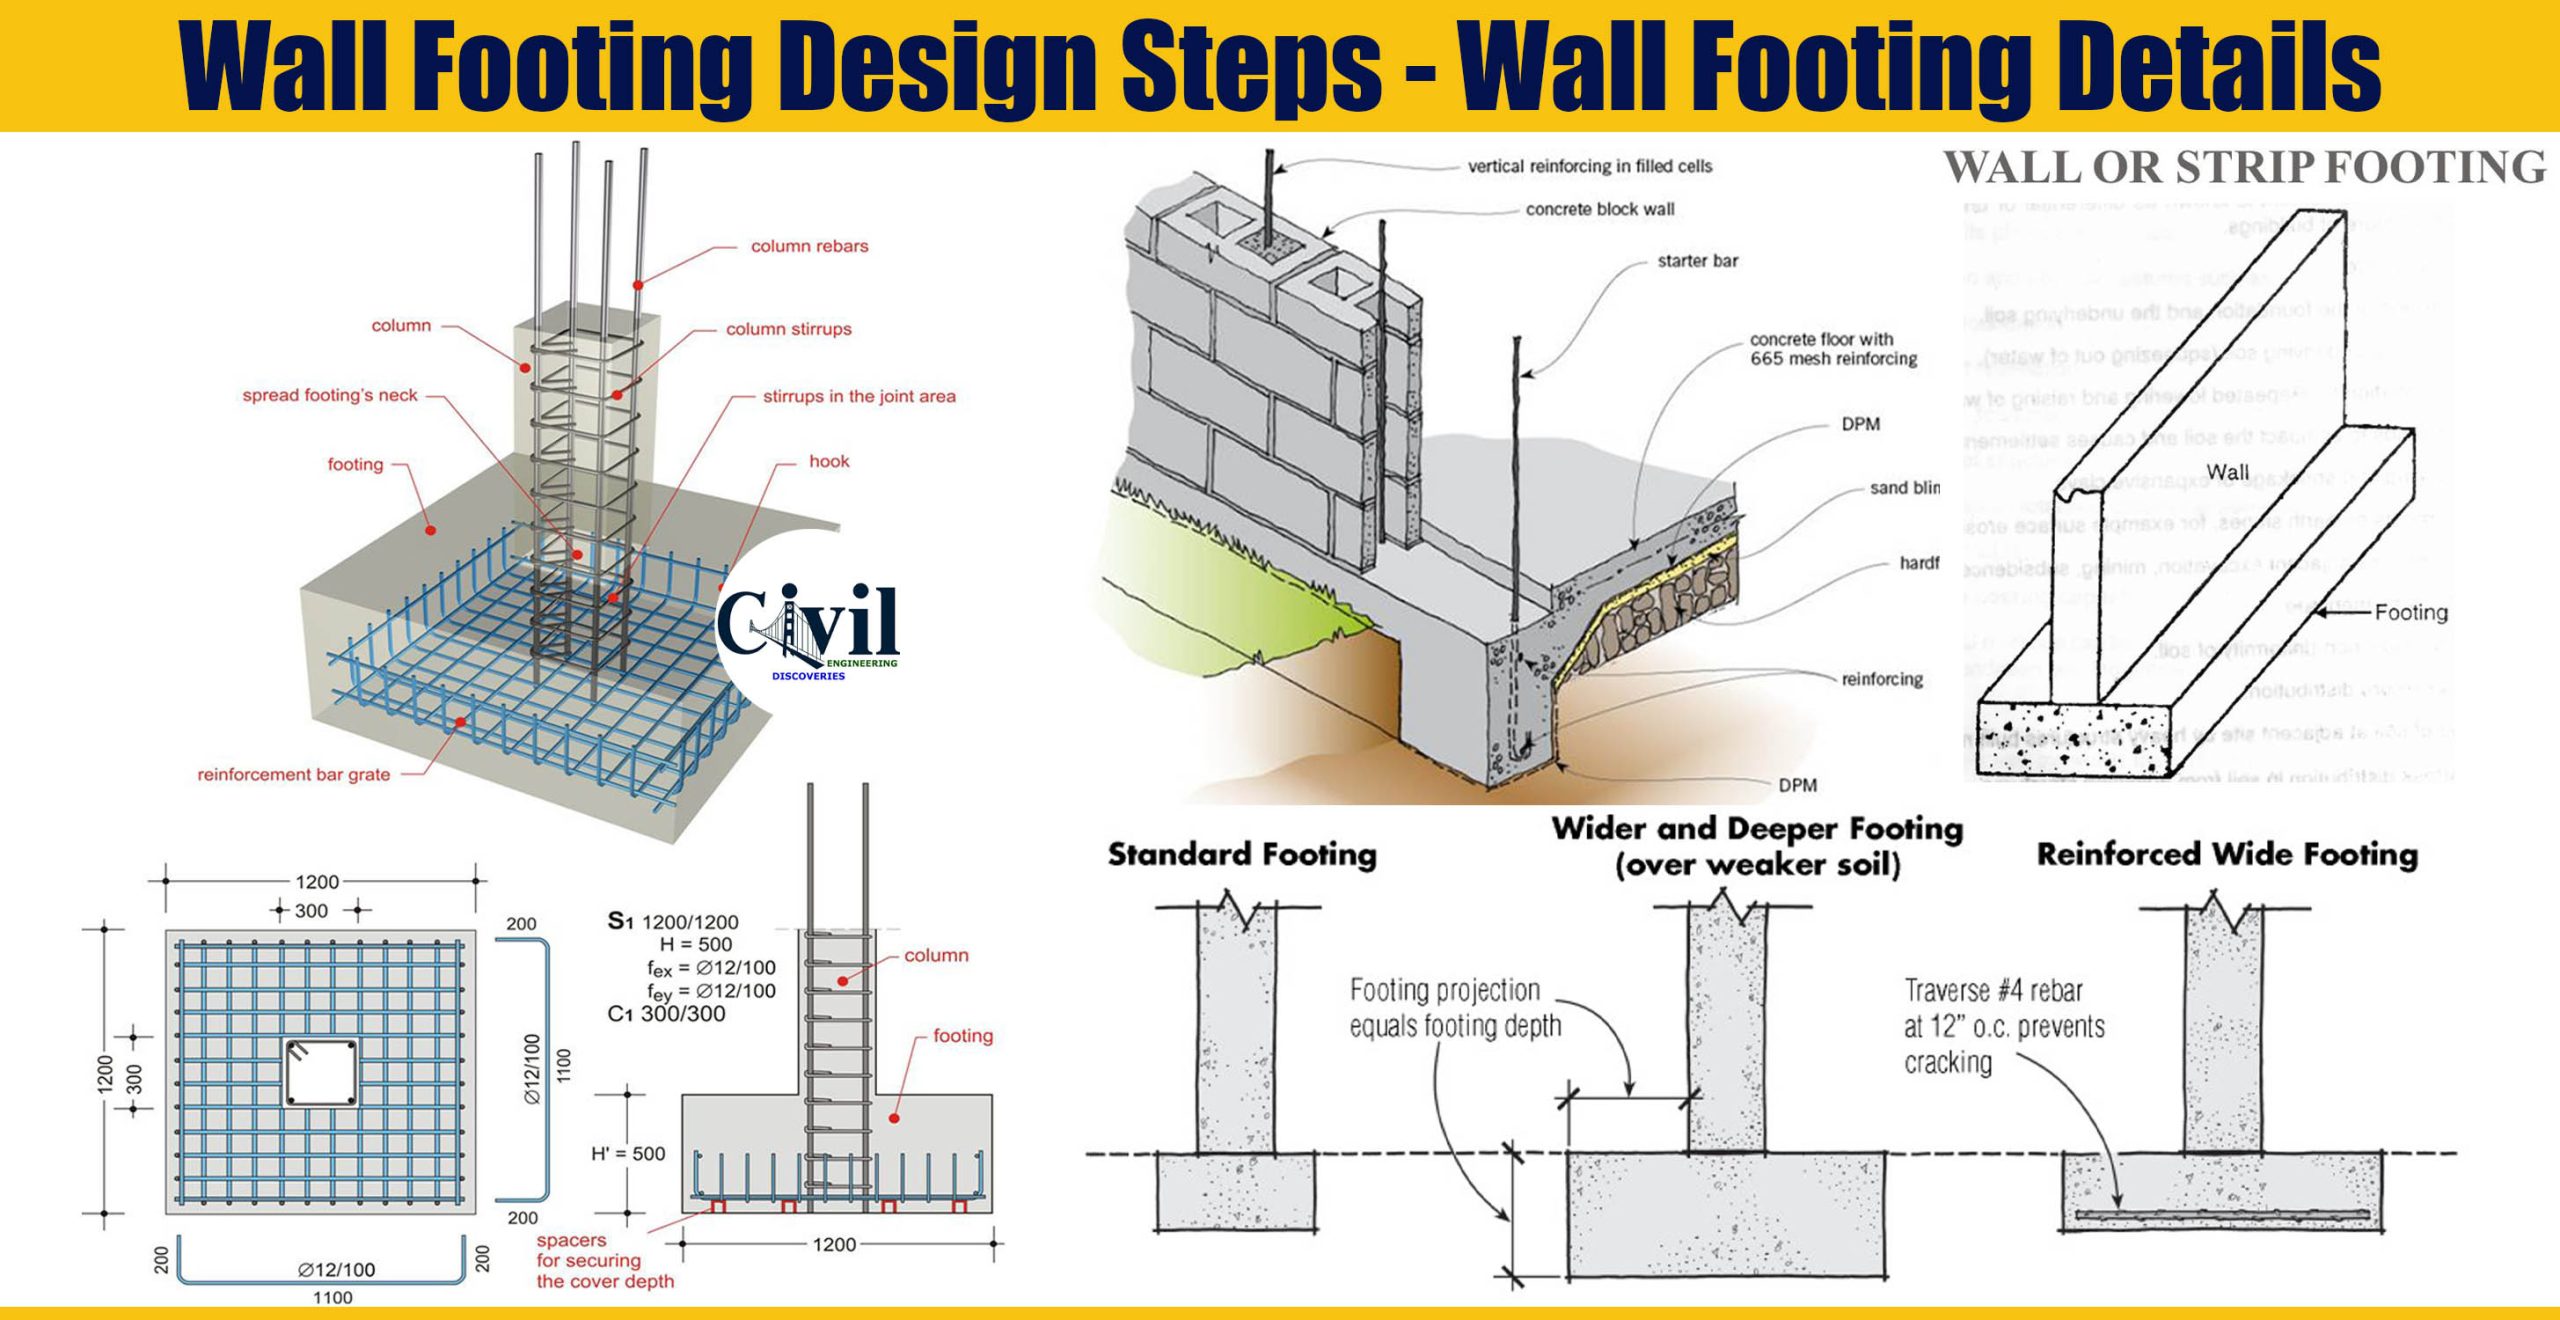 Slab Column Footing-Typical - CAD Files, DWG files, Plans and Details